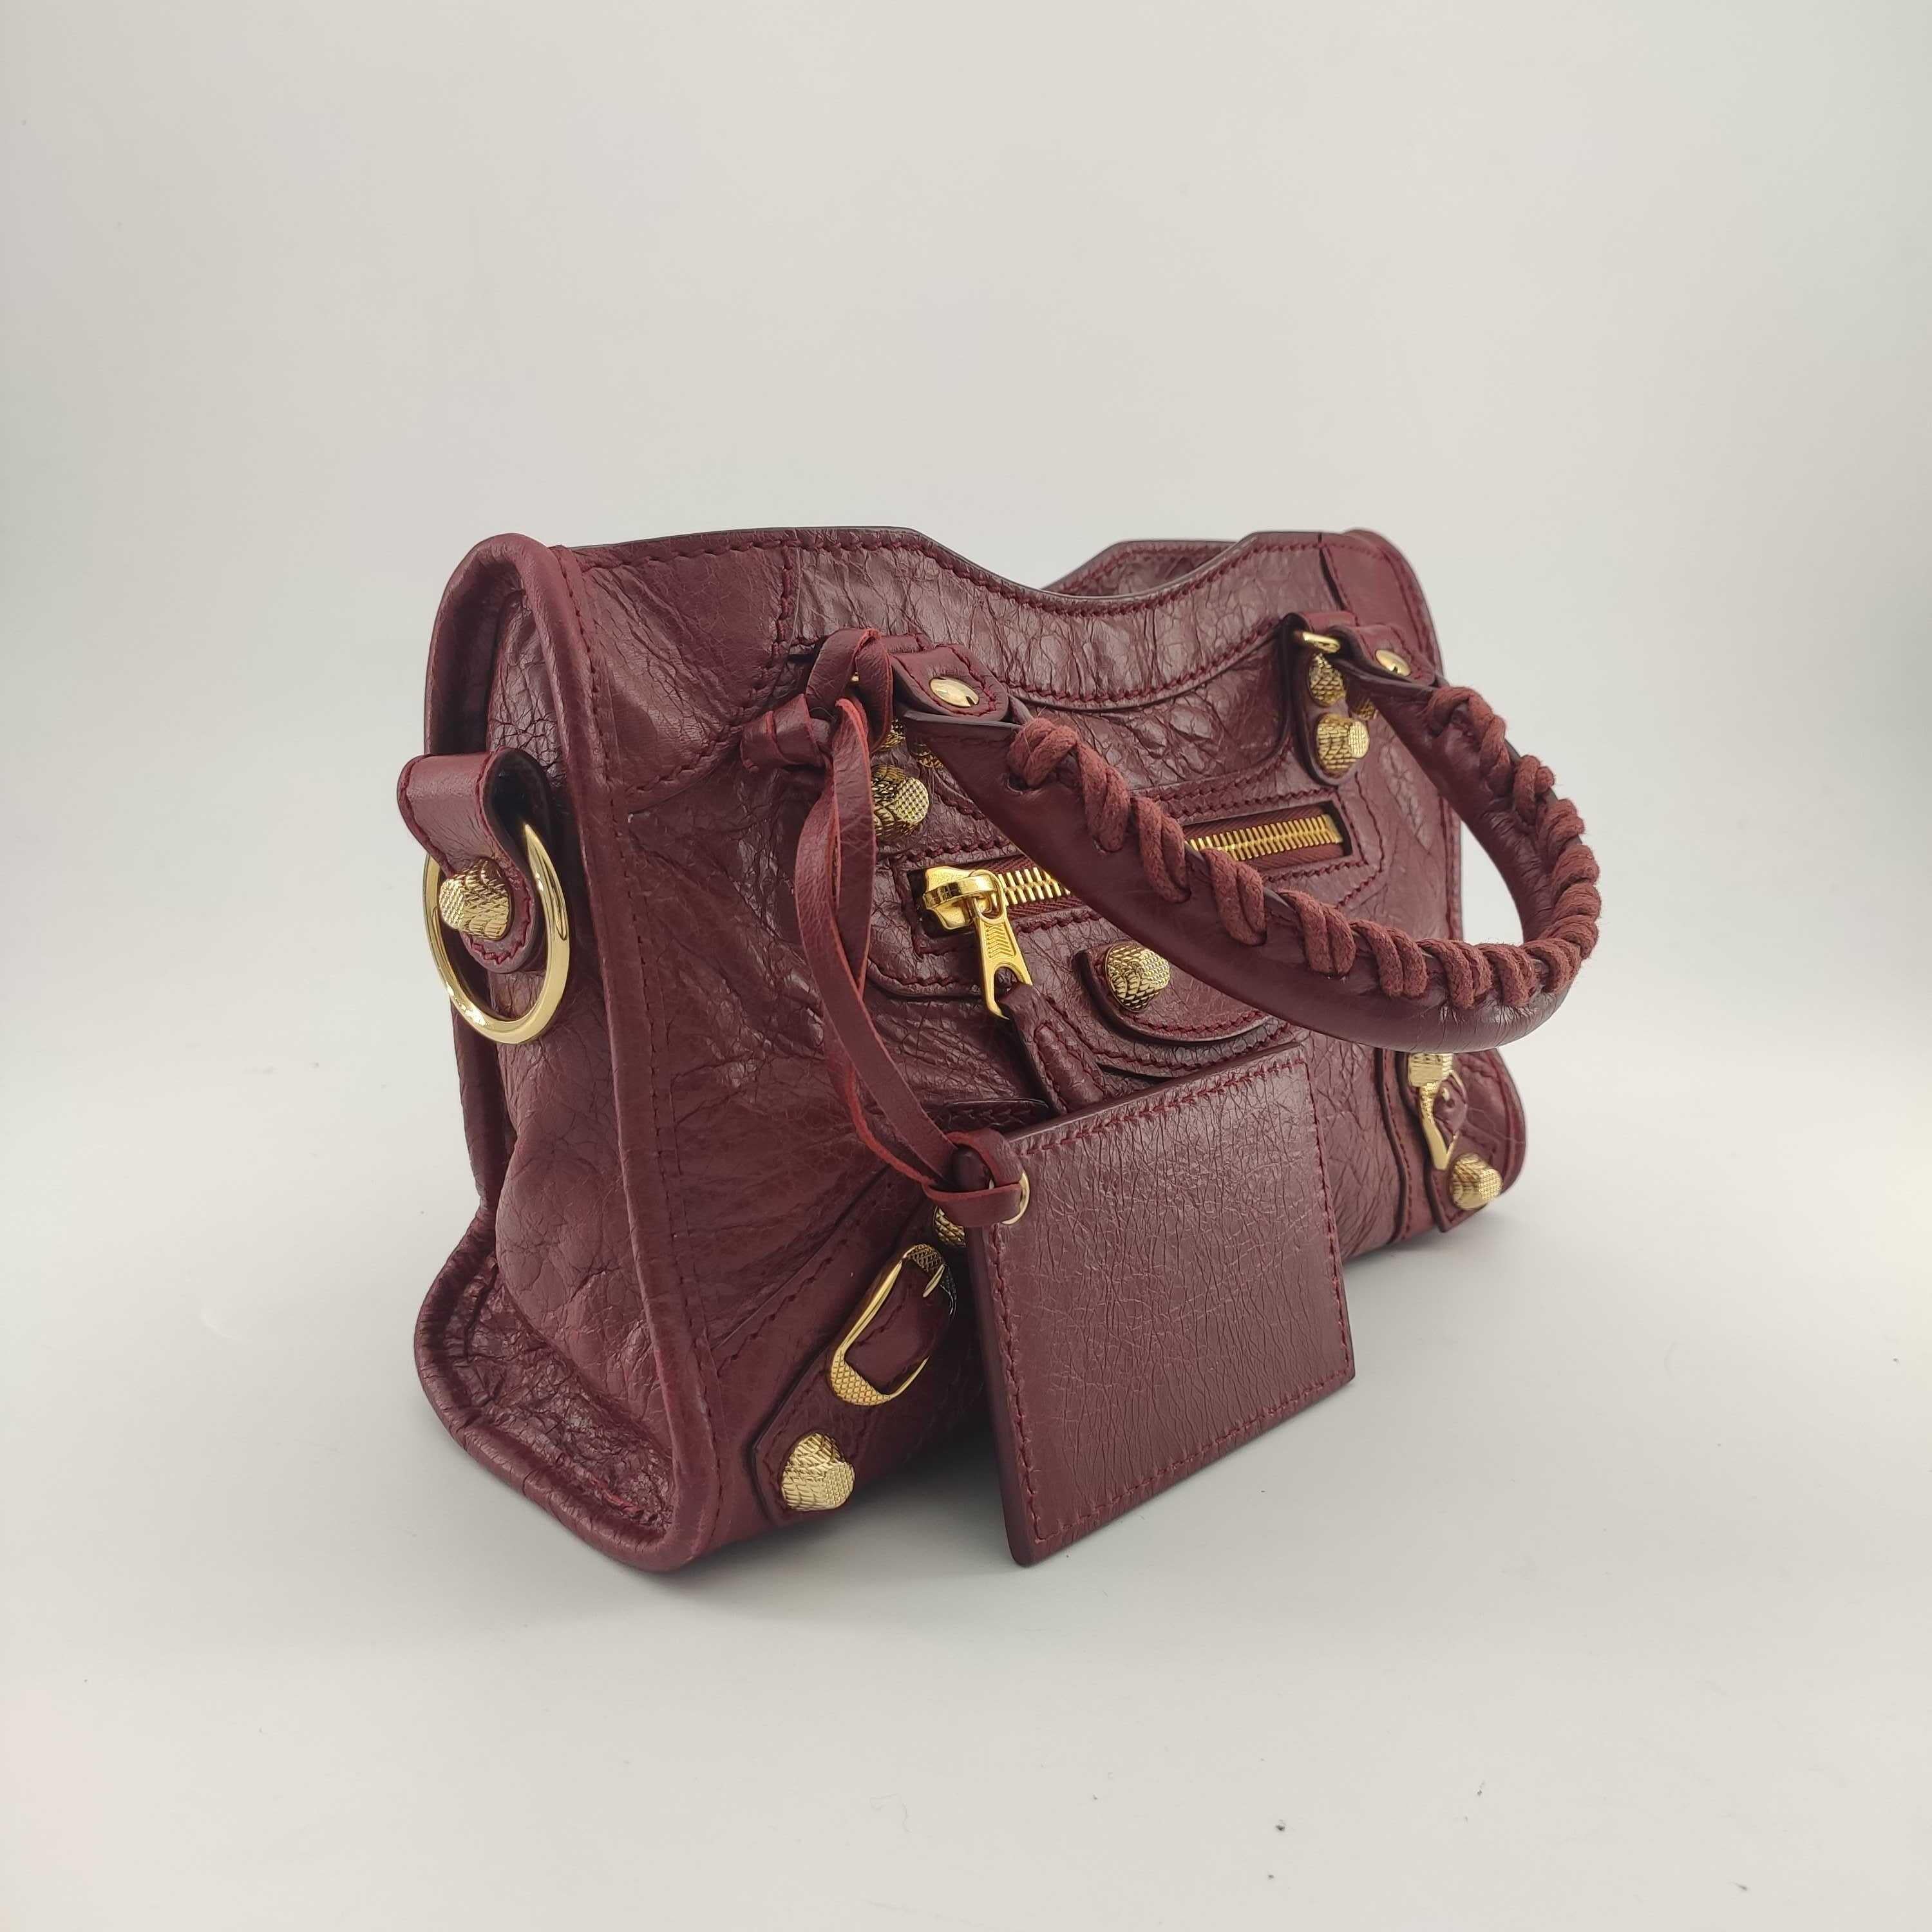 - Designer: BALENCIAGA
- Model: City
- Condition: Very good condition. Sign of wear on base corners
- Accessories: None
- Measurements: Width: 23.5cm, Height: 15cm, Depth: 7cm, Strap: 108cm
- Exterior Material: Leather
- Exterior Color: Burgundy
-